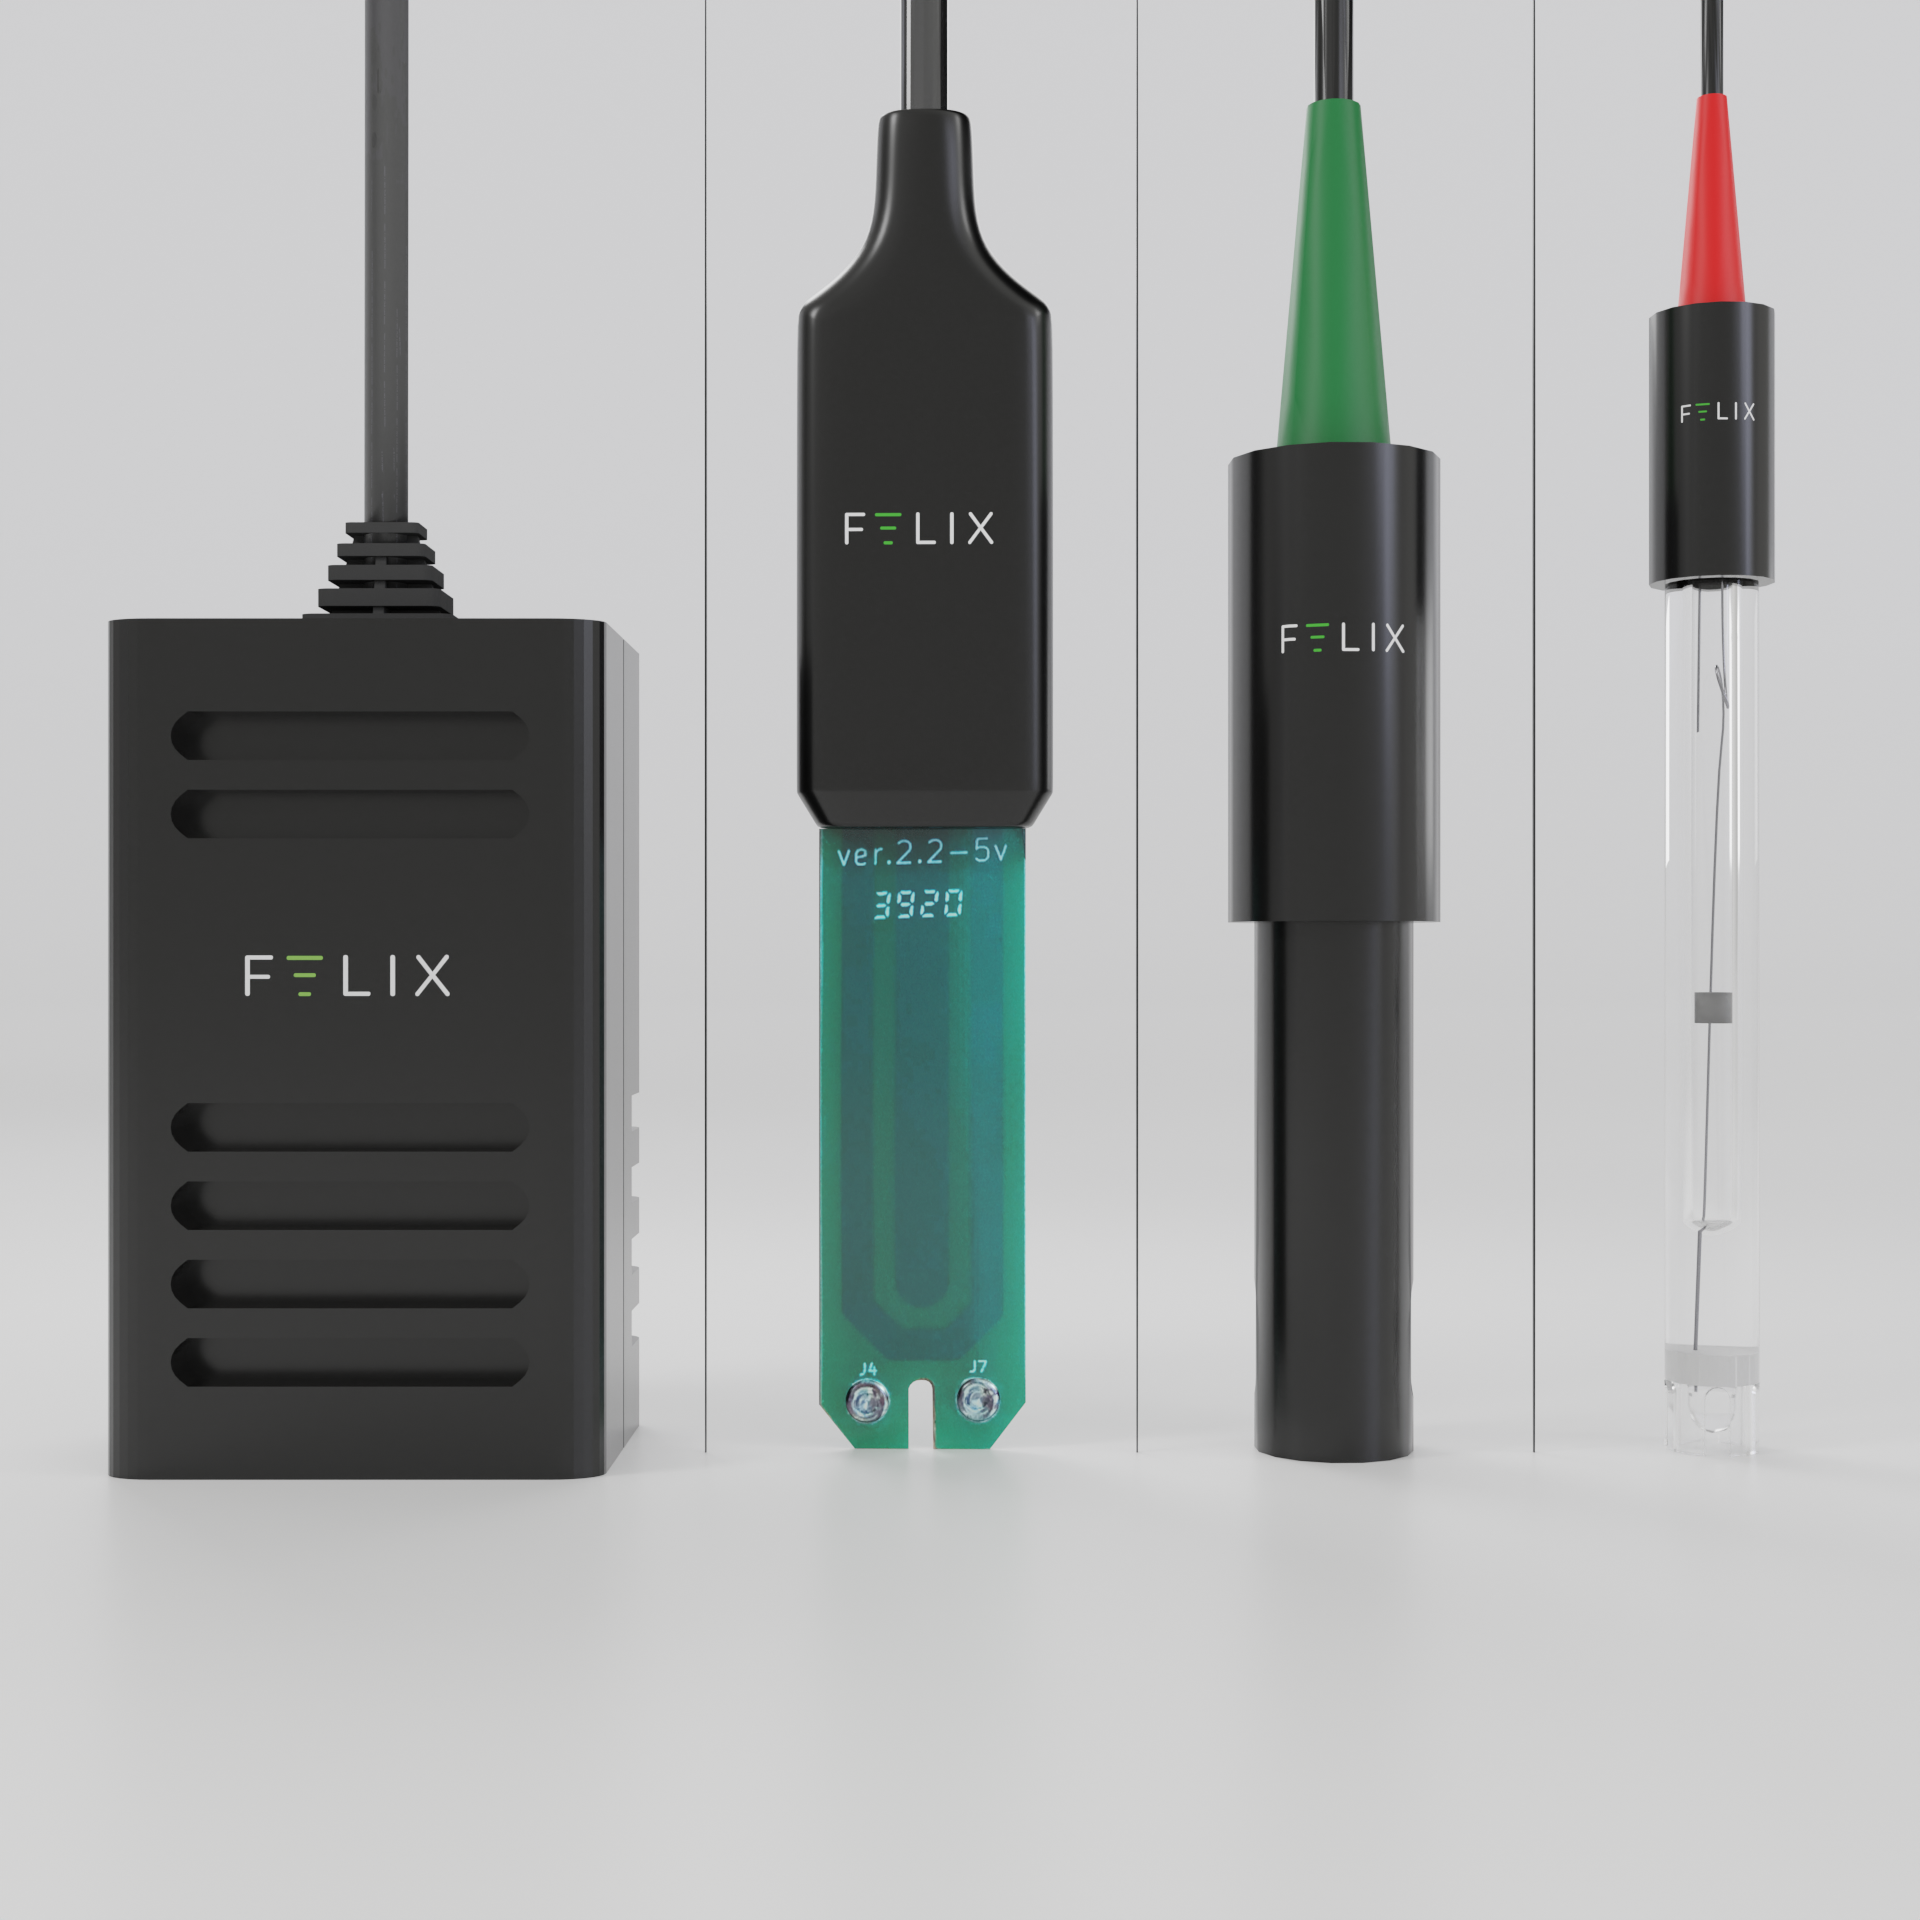 The Felix Smart Air Temperature and Humidity Sensor is shown next to the Felix Smart Moisture and Temperature Probe, the Felix Smart Conductivity Probe, and the Felix Smart pH Water Probe.